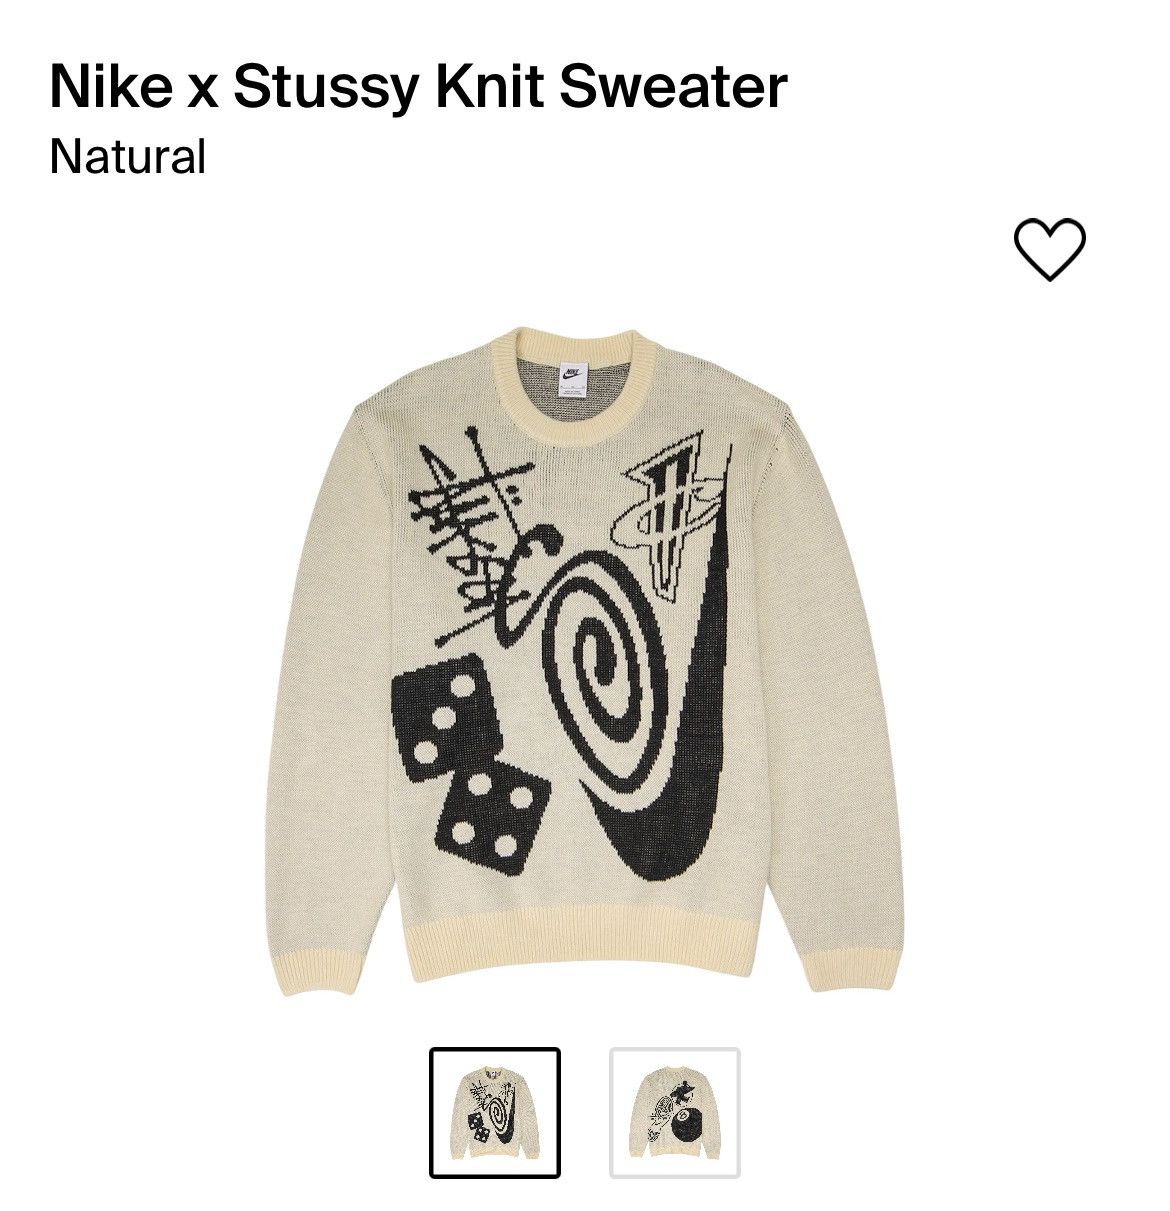 Nike Nike Stussy Knit Sweater Natural | Grailed